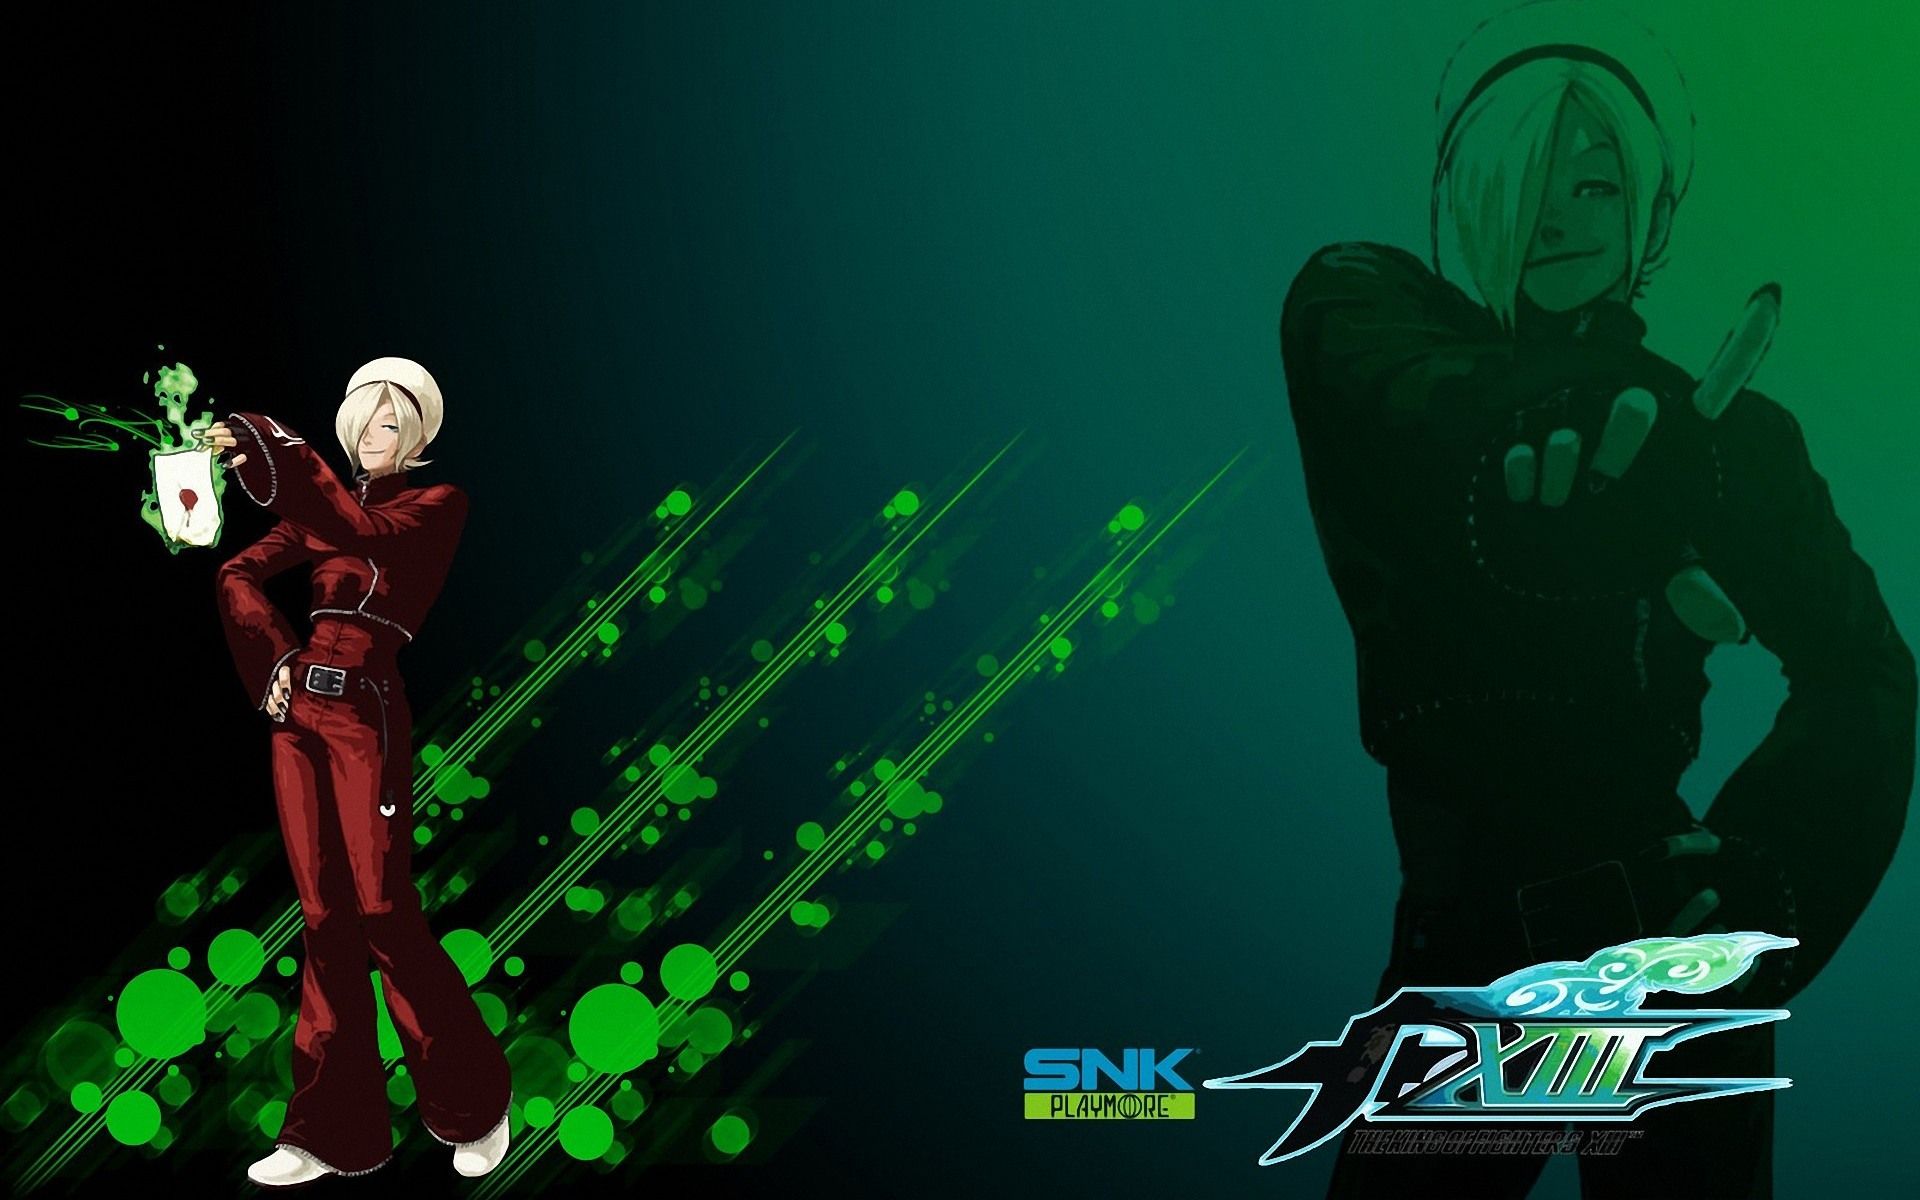 King Of Fighters Xiii